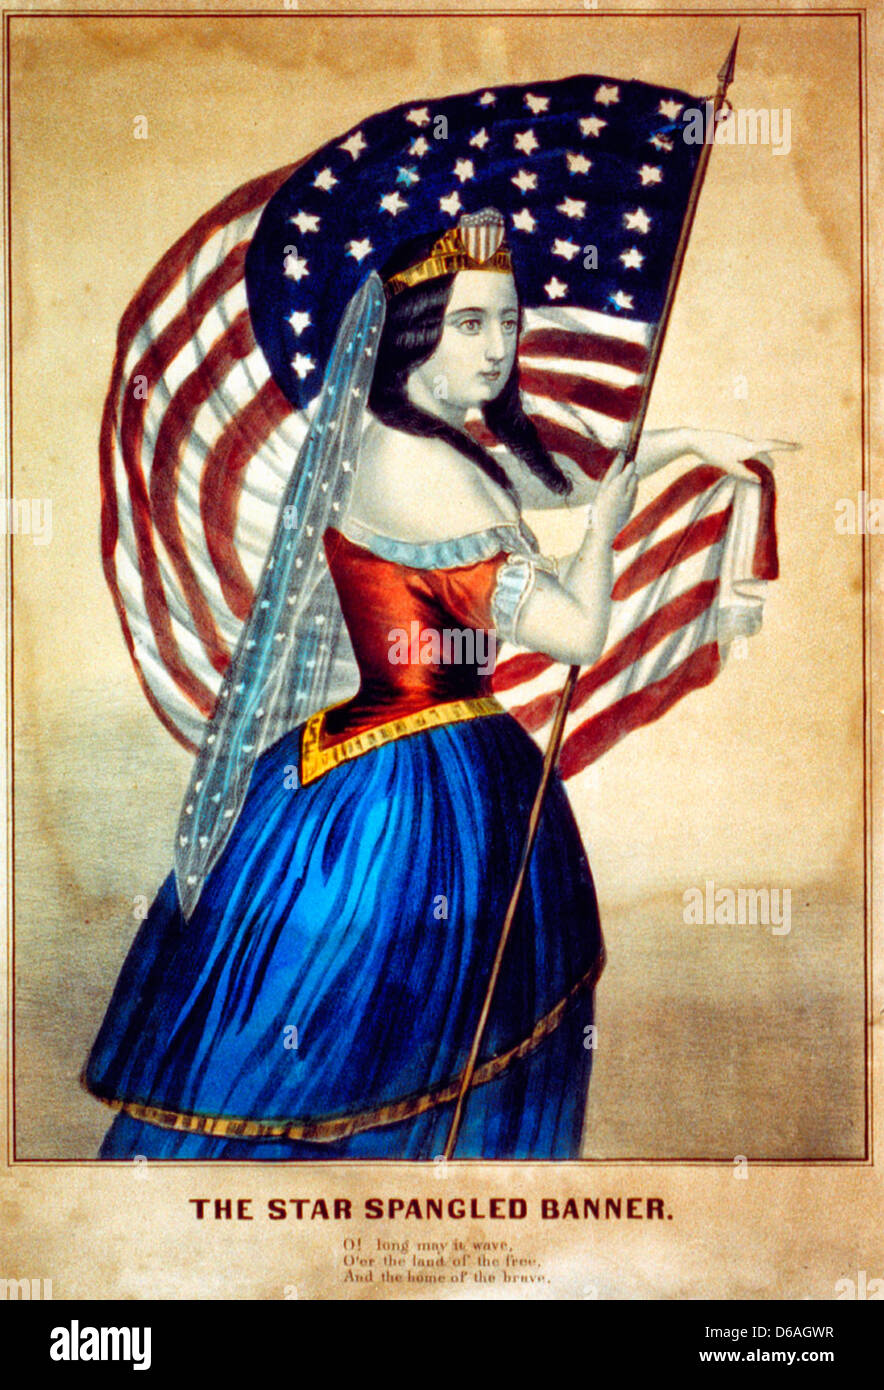 Le Star Spangled Banner, dame, vers 1880 Banque D'Images